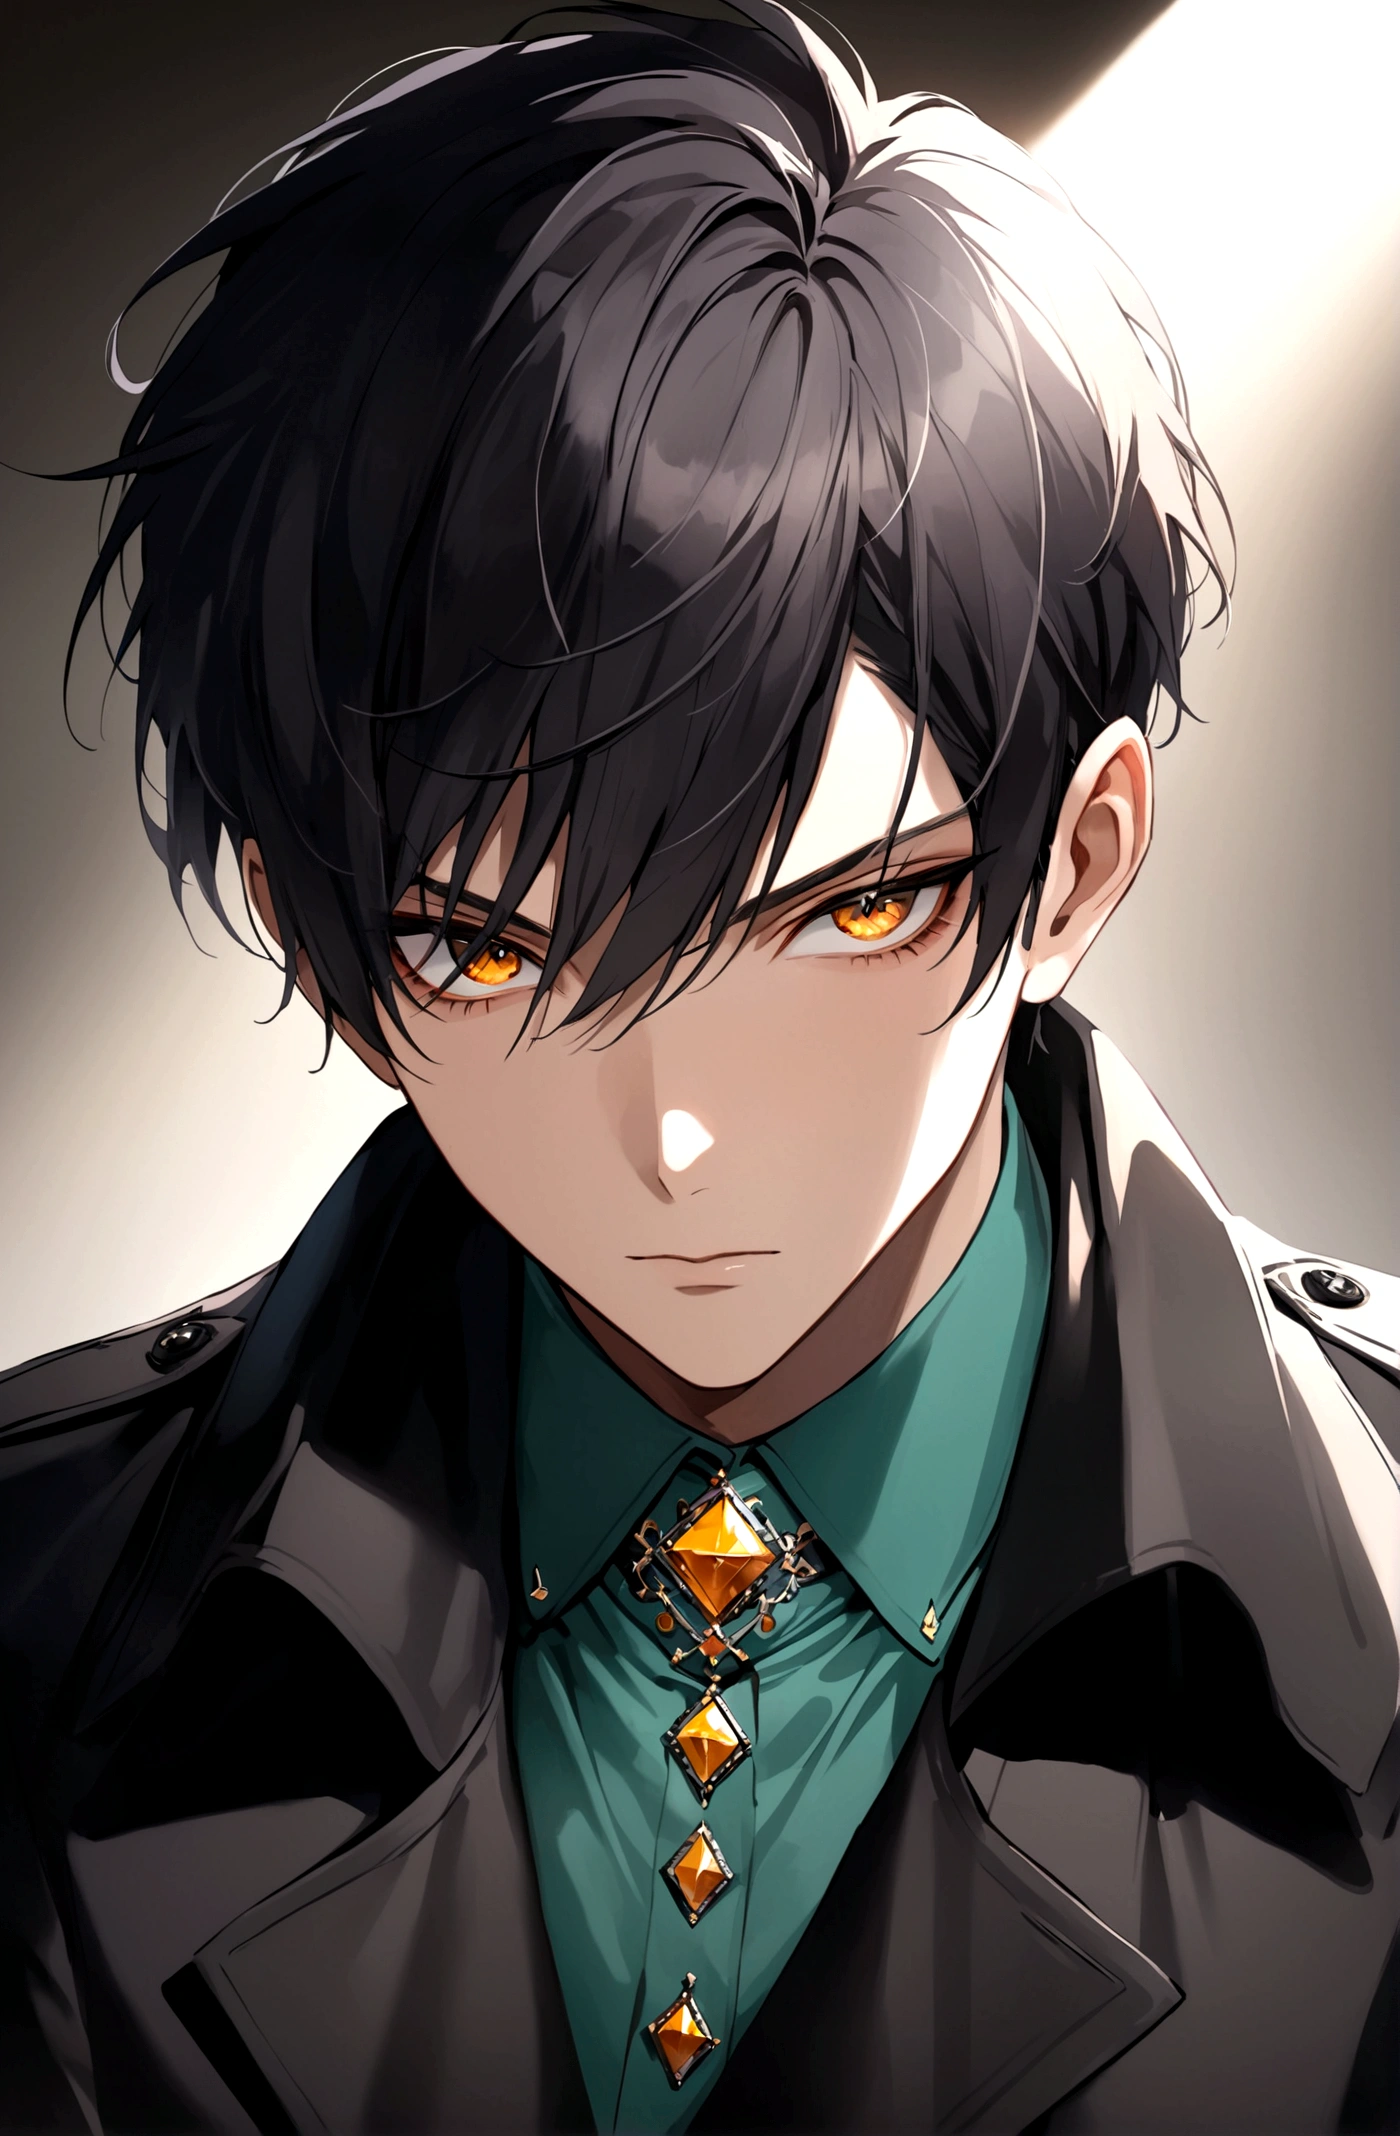 Poker face,Exquisite facial features,Young male，Black trench coat